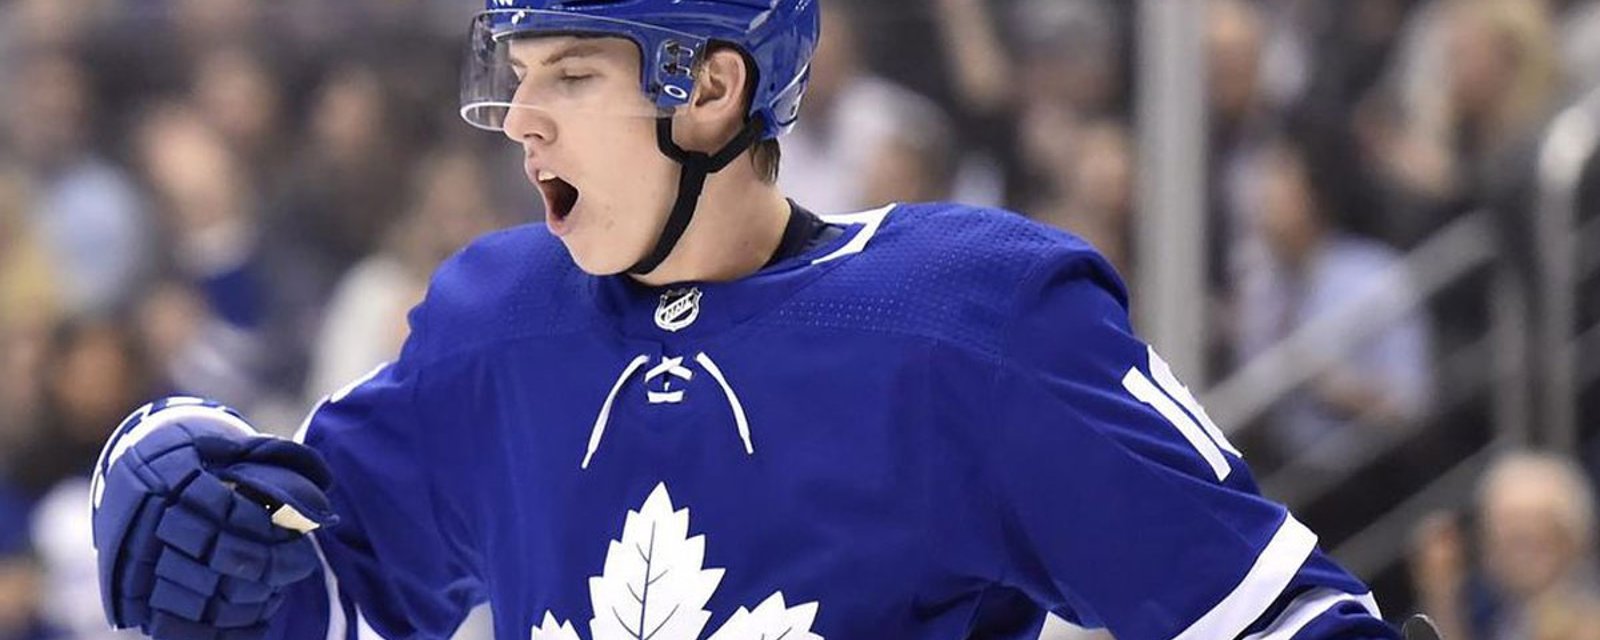 NHL team to “drop nuclear bomb” in Marner’s negotiations 